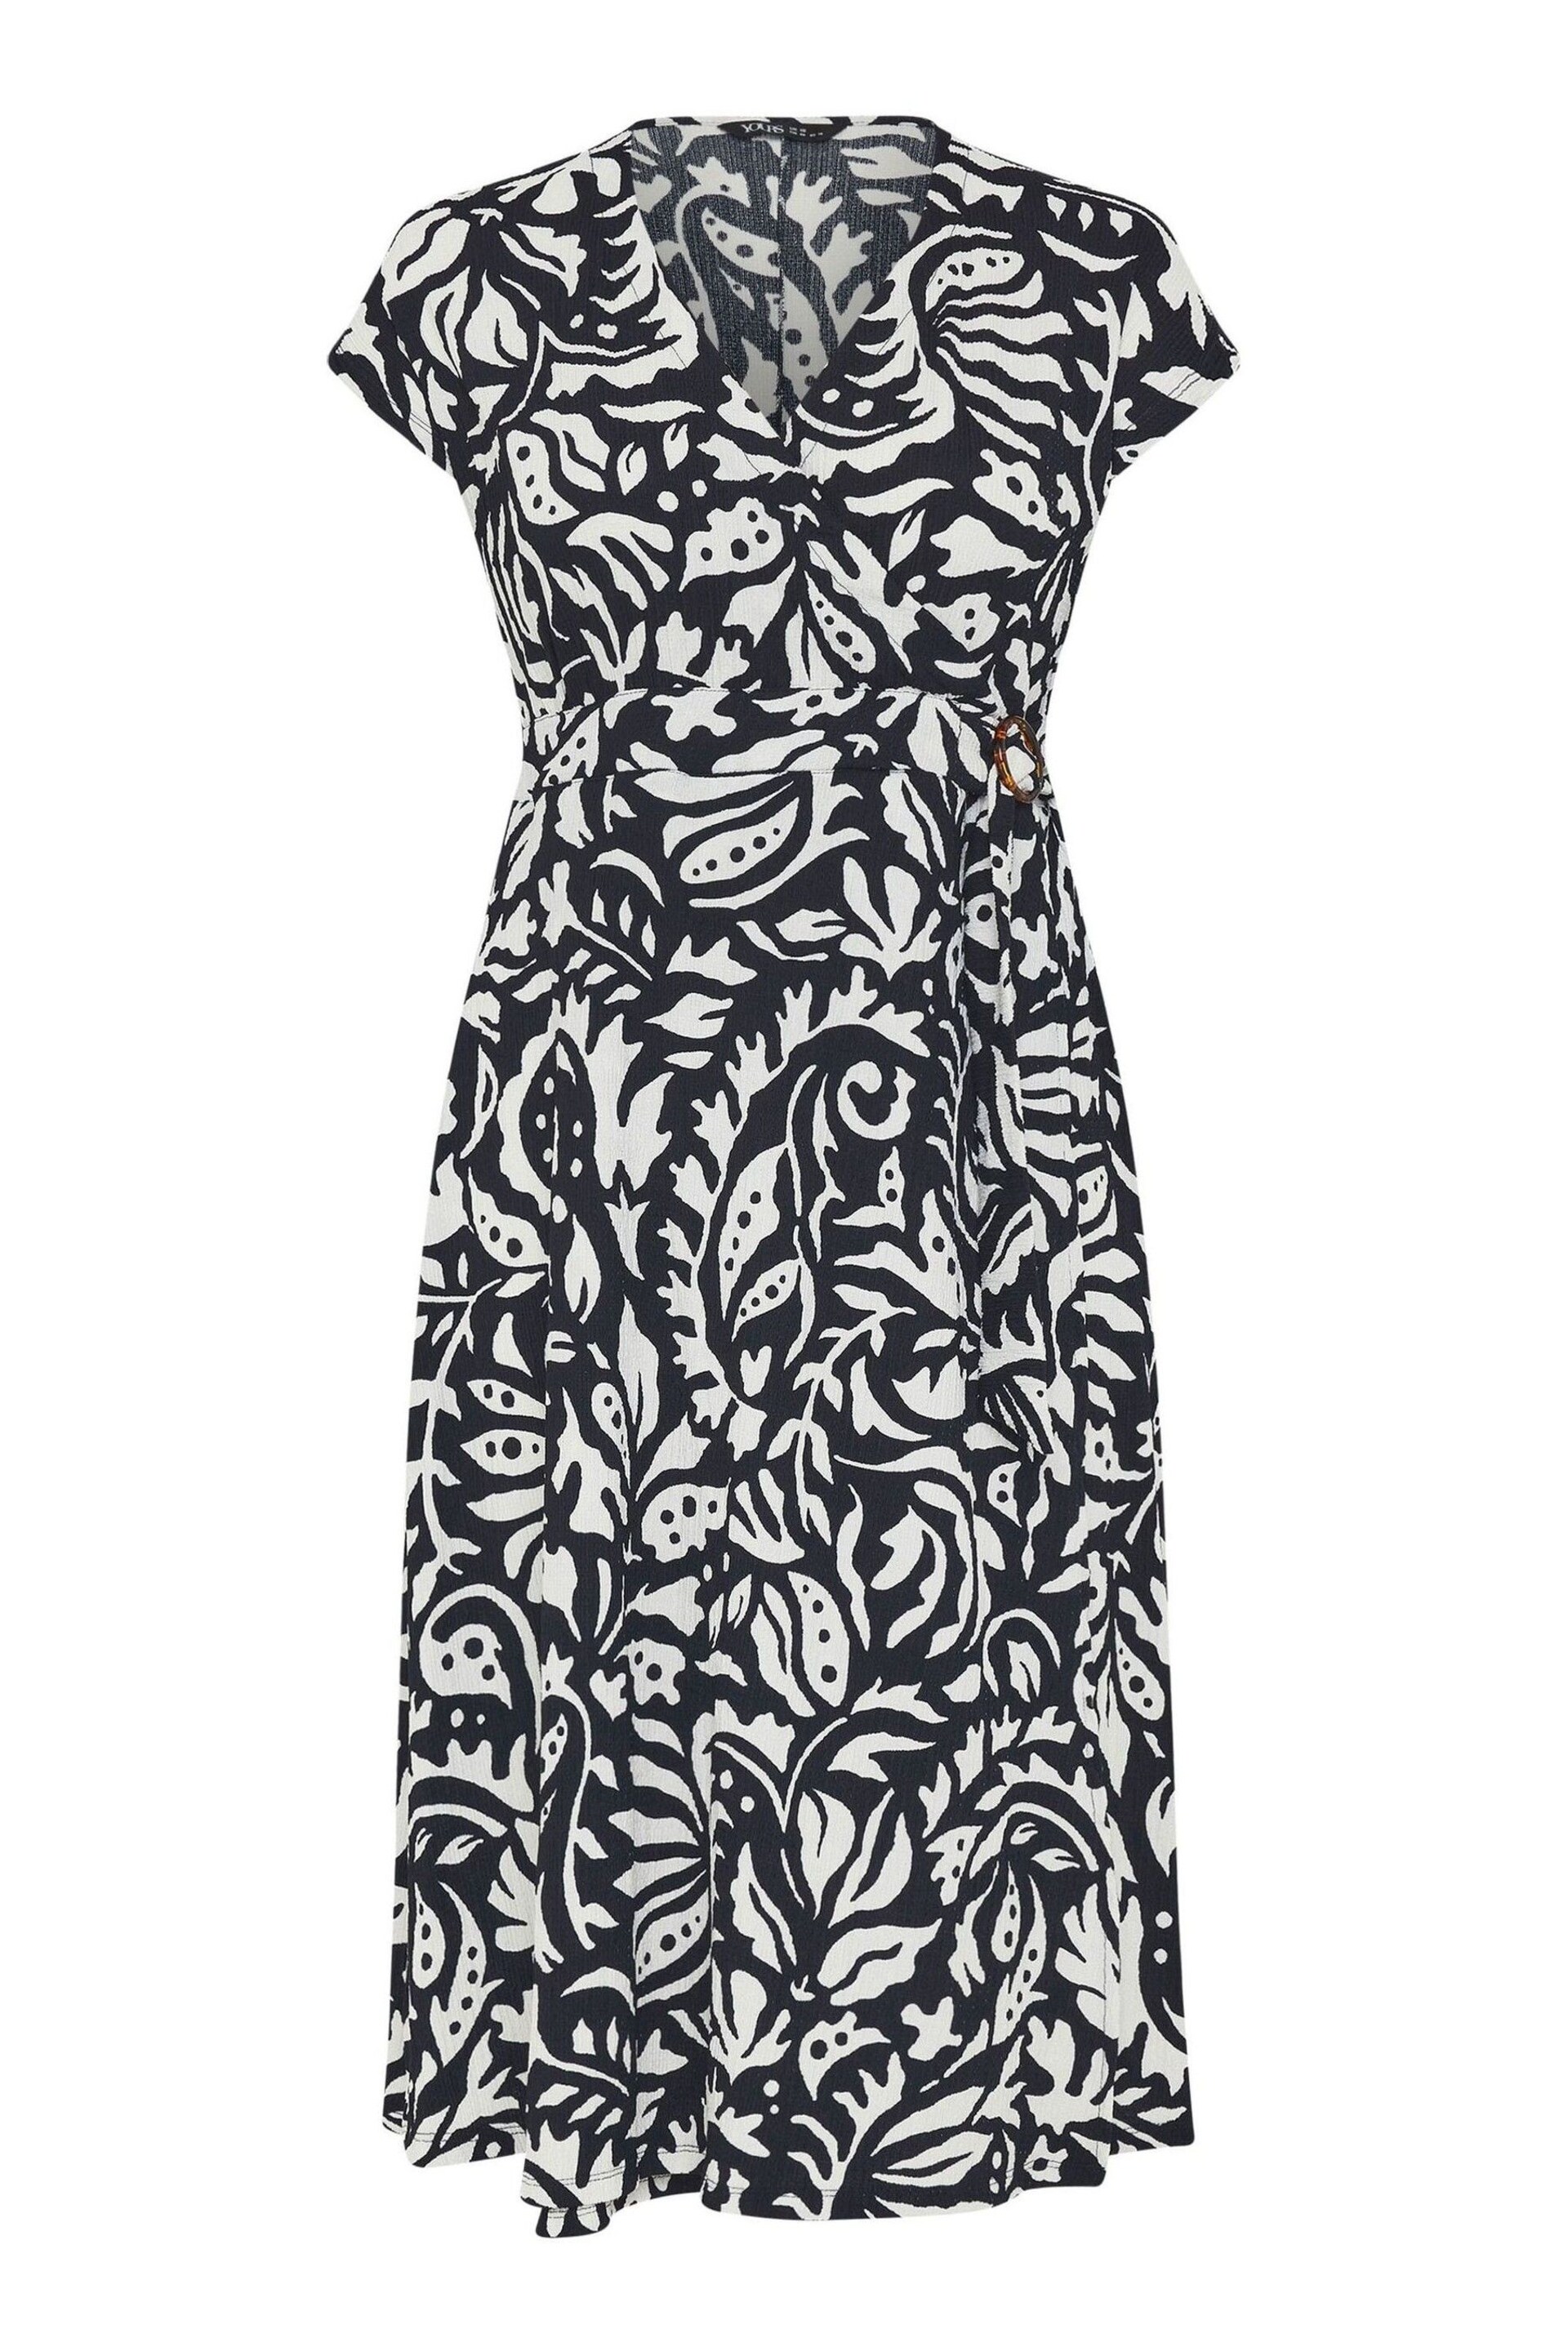 Yours Curve Black & White Floral Print Wrap Dress - Image 5 of 5